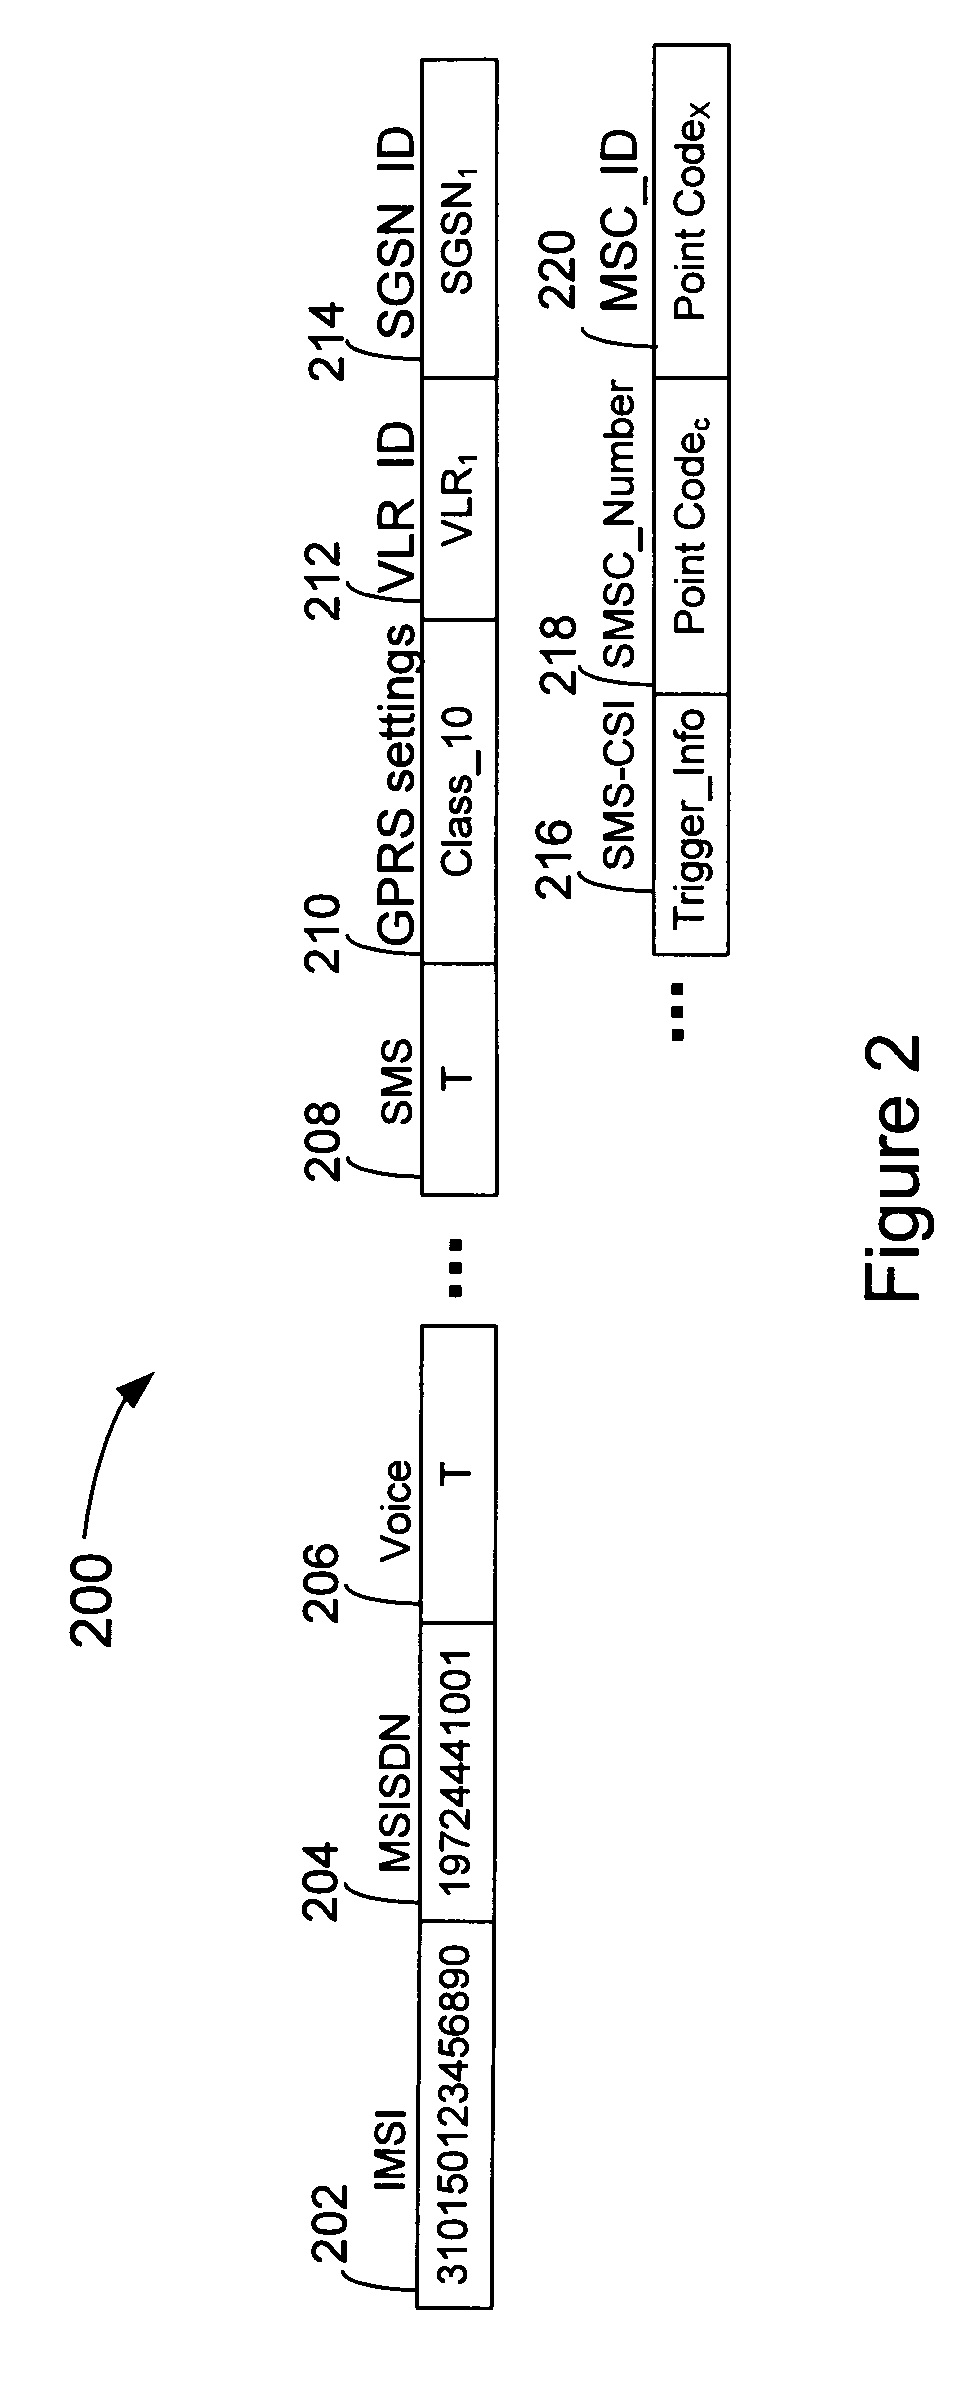 System, Method, and Computer-Readable Medium for Concurrent Termination of Multiple Calls at a Mobile Terminal